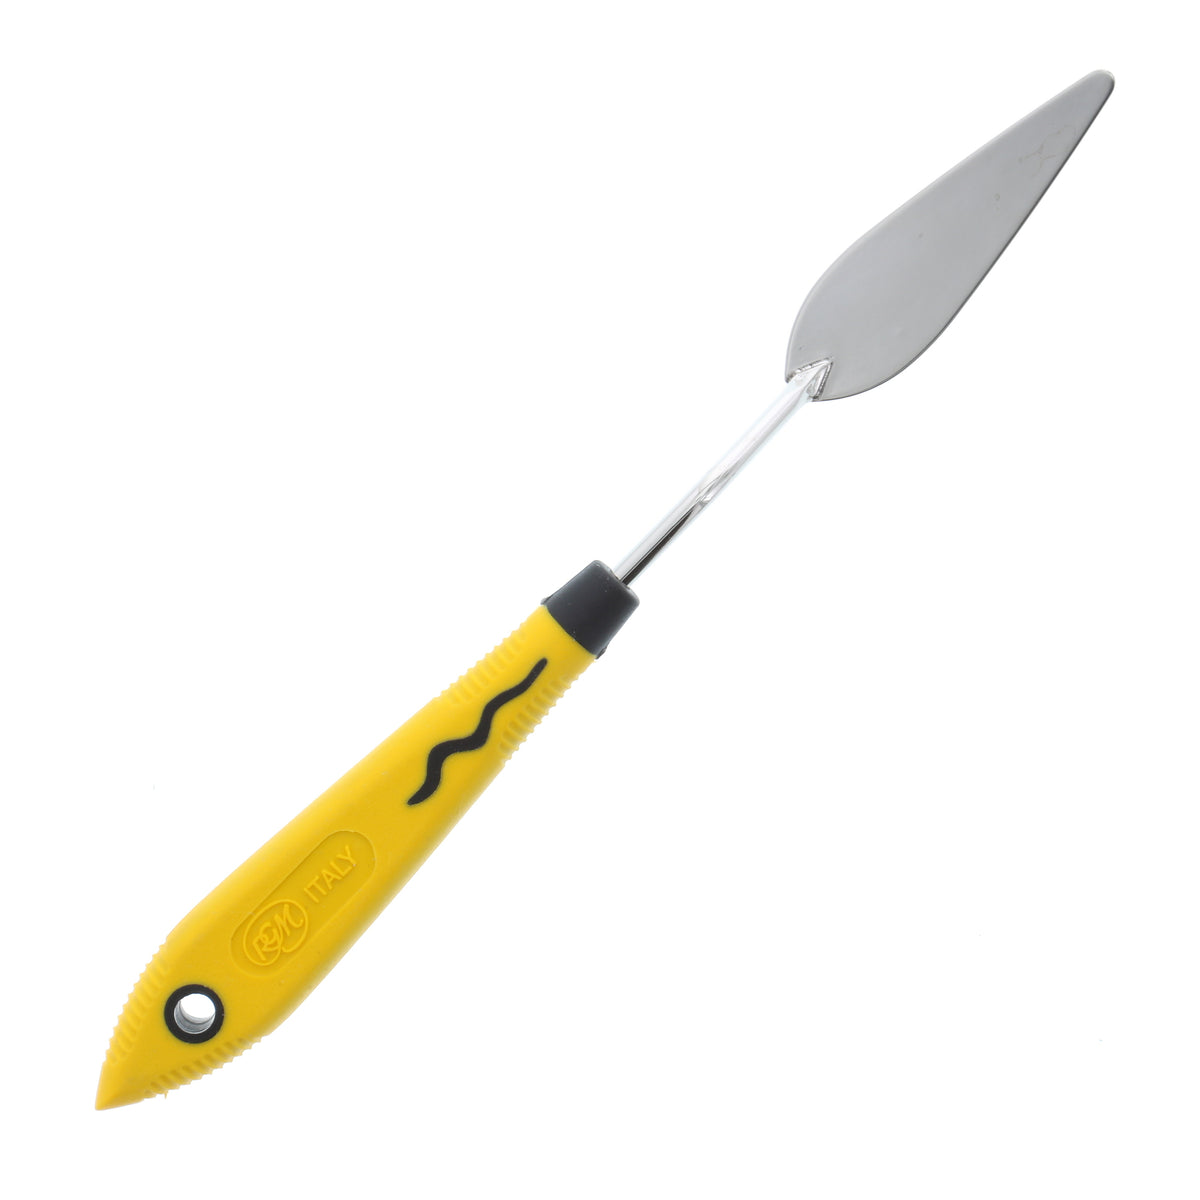 PAINT KNIFE CHESON 846 500846